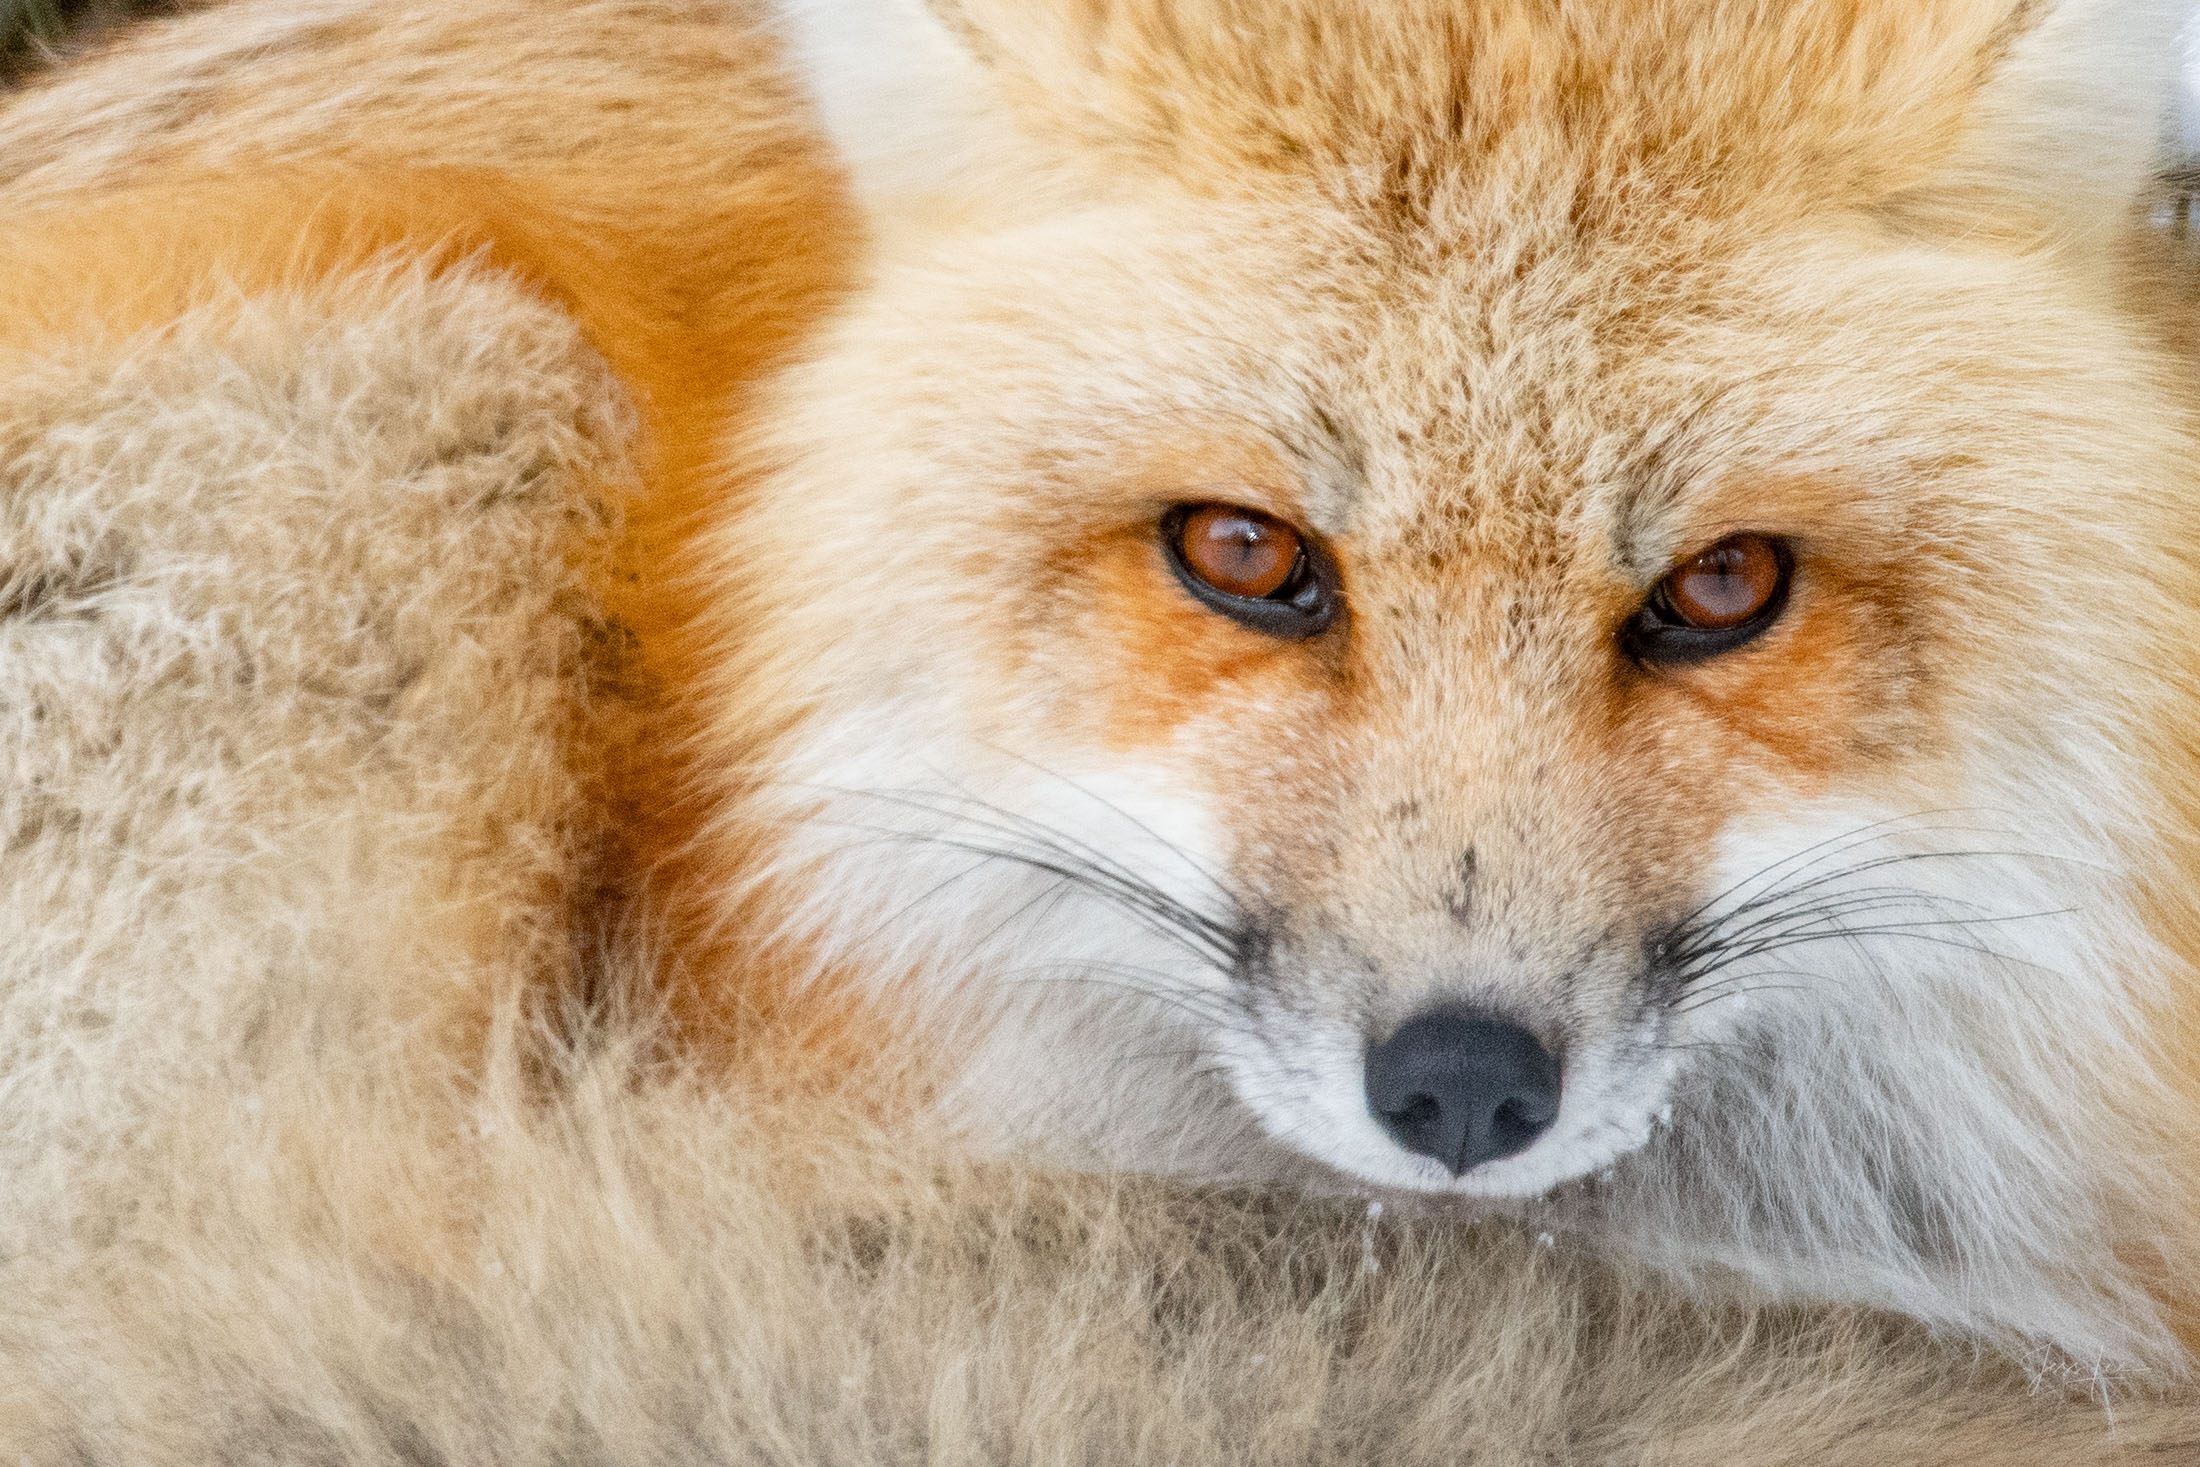 Fox Photo 4 is presented in Limited Edition of 250 Exclusive high-resolution Museum Quality Fine Art Prints. Wildlife Photo of...